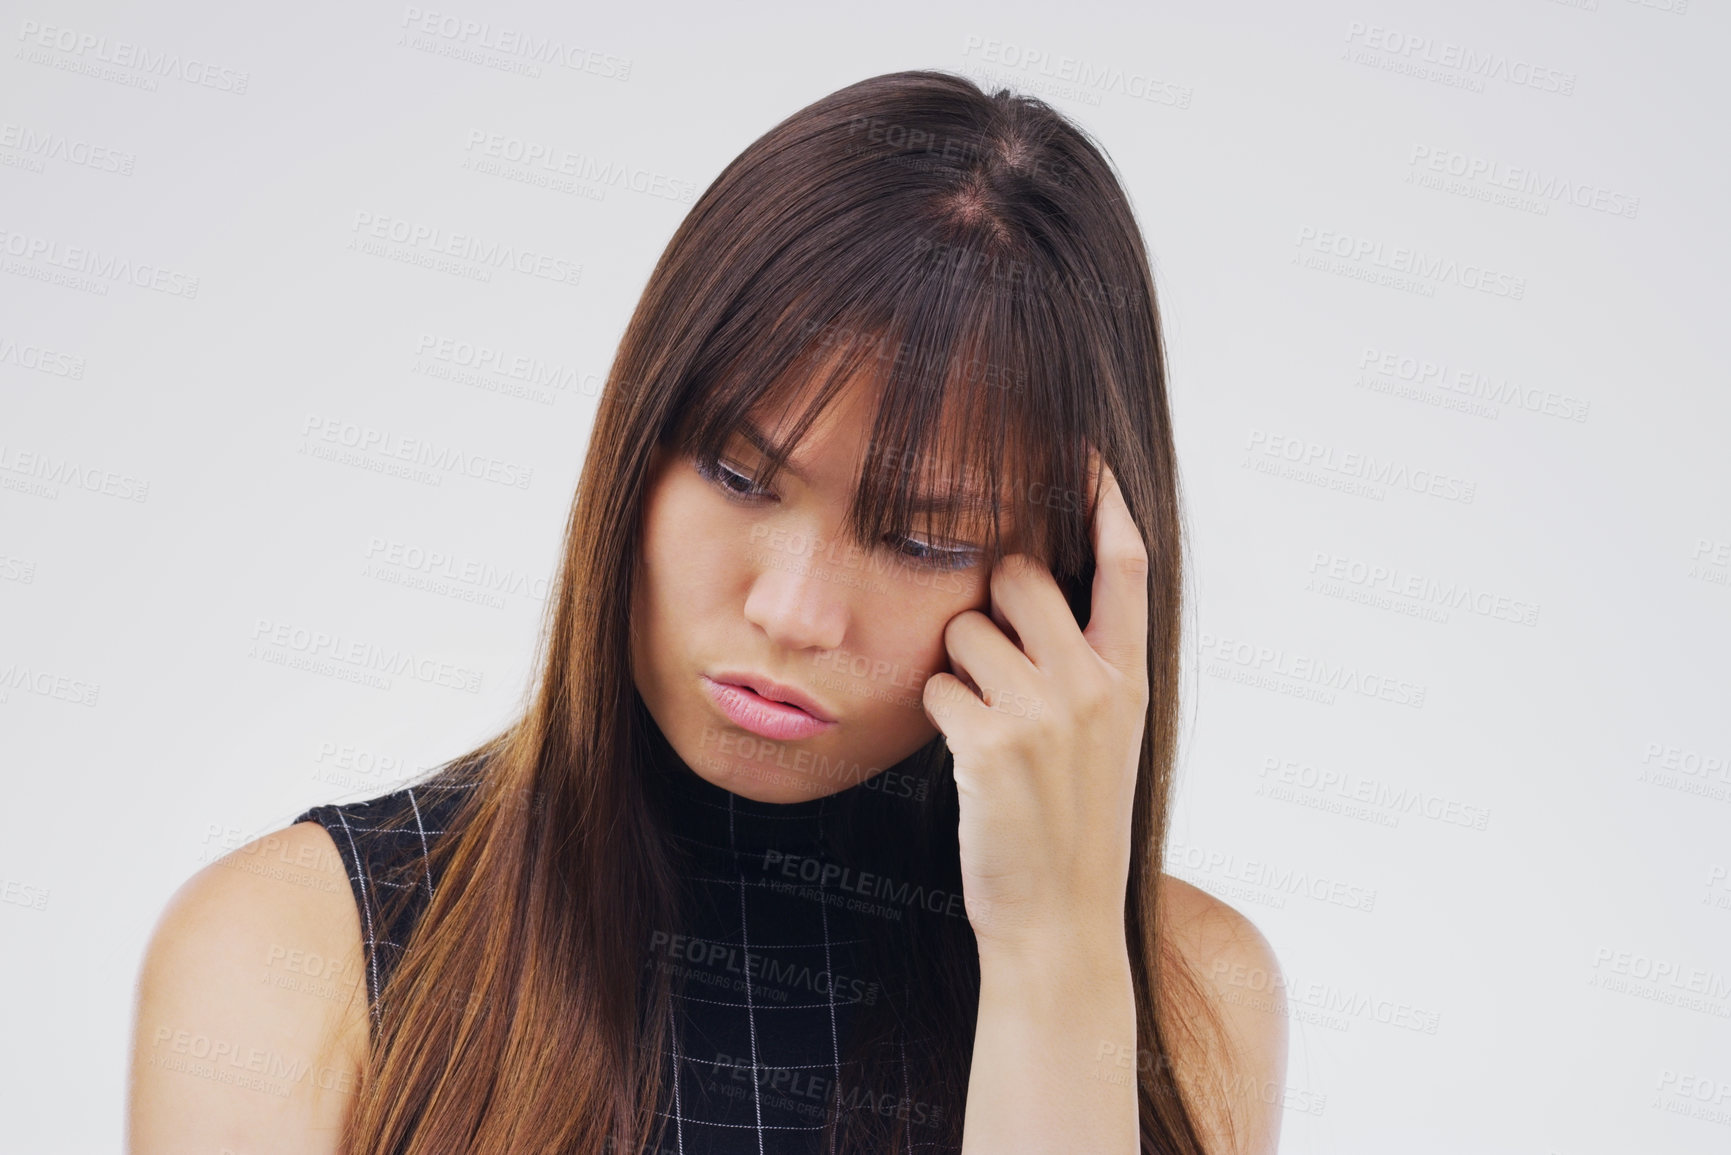 Buy stock photo Studio shot of a young woman looking thoughtful against a gray background